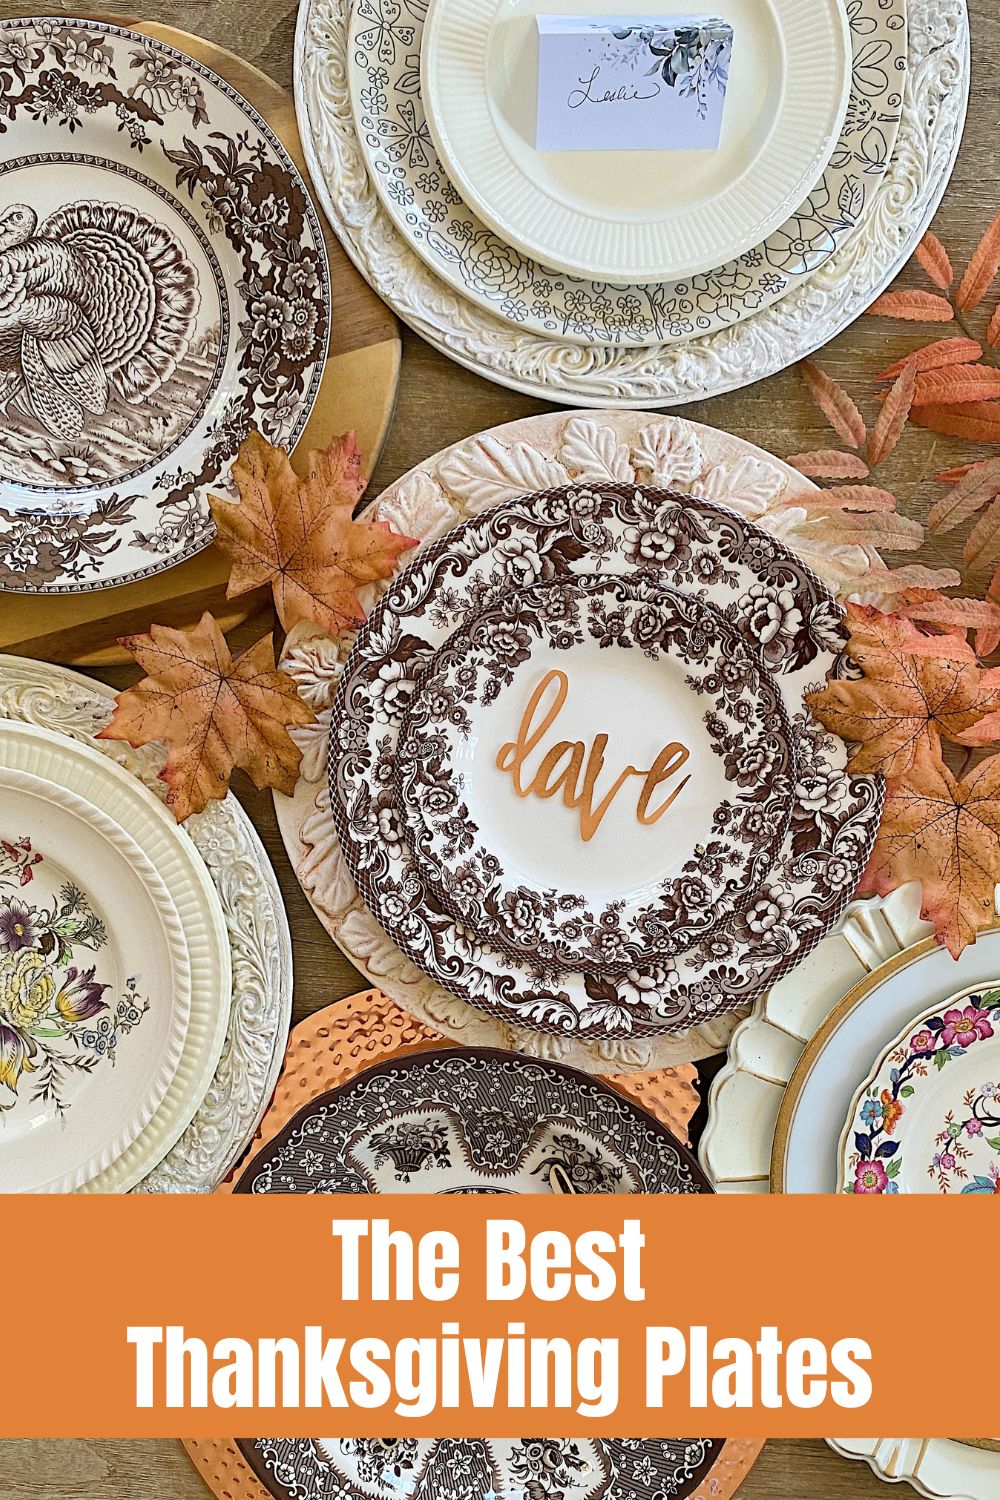 I went through our Butler's Pantry and found my favorite Thanksgiving plates. I have been collecting plates for years and I love these!